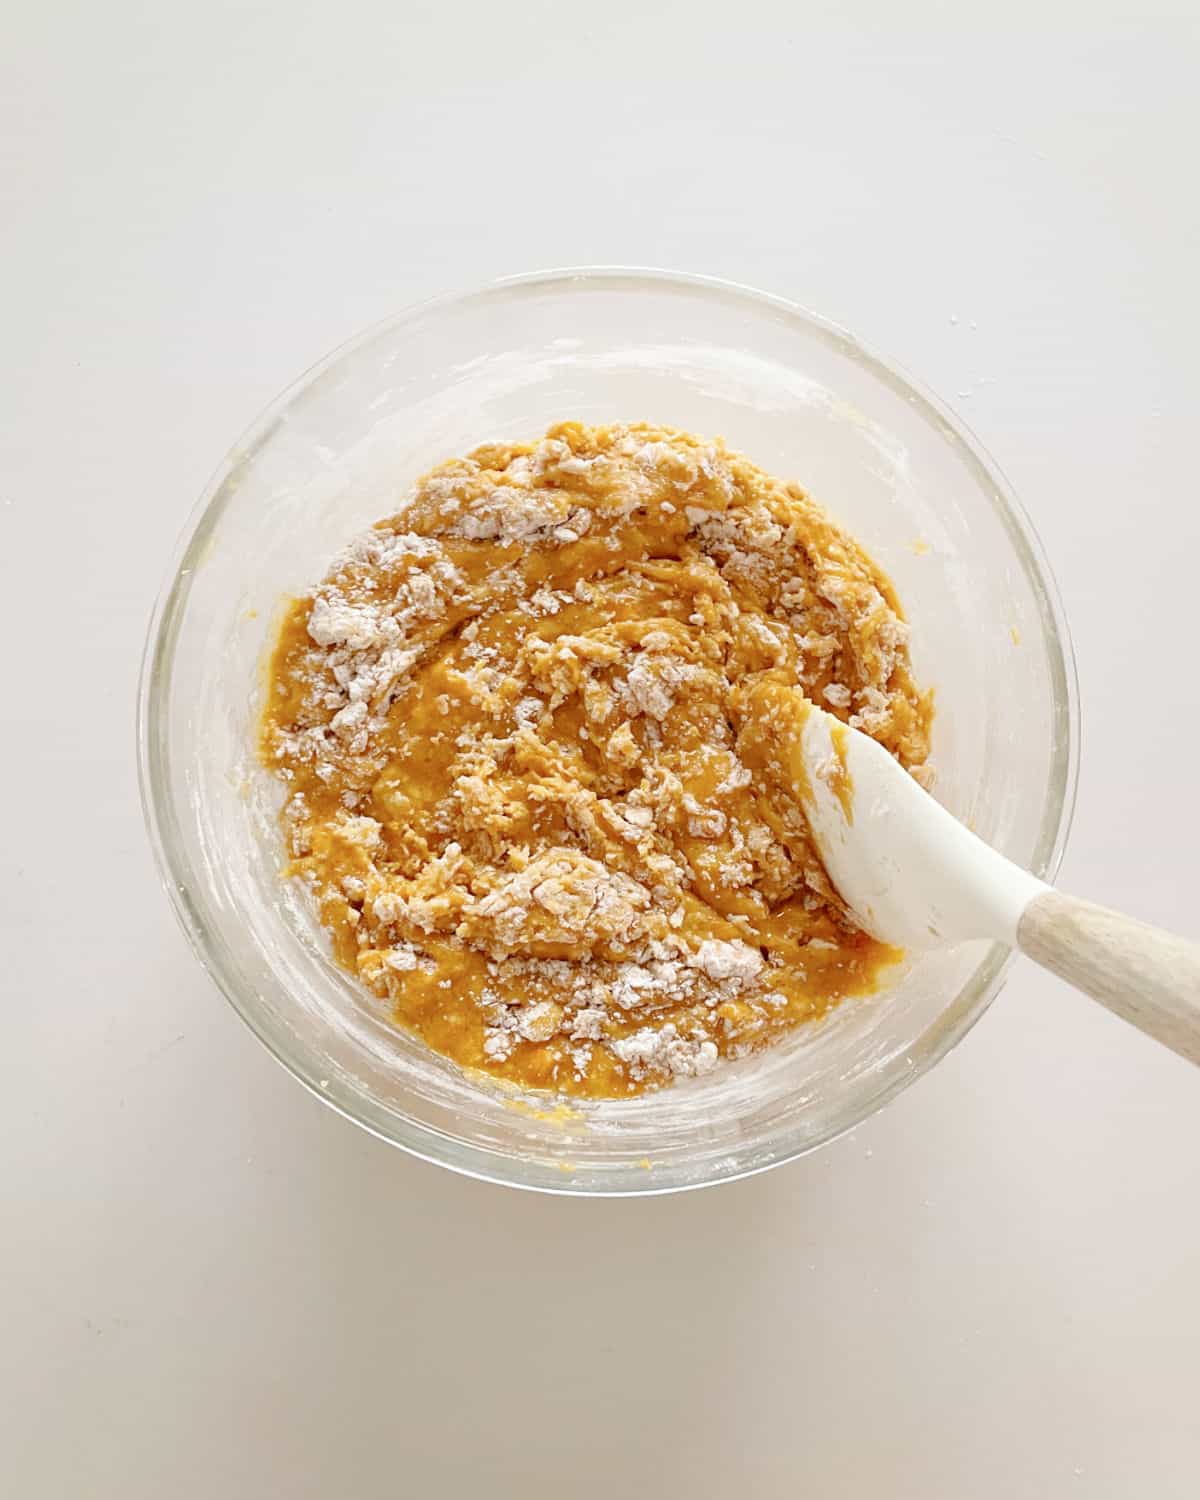 Stirring flour into pumpkin muffin mixture with white spatula in a glass bowl. White surface.